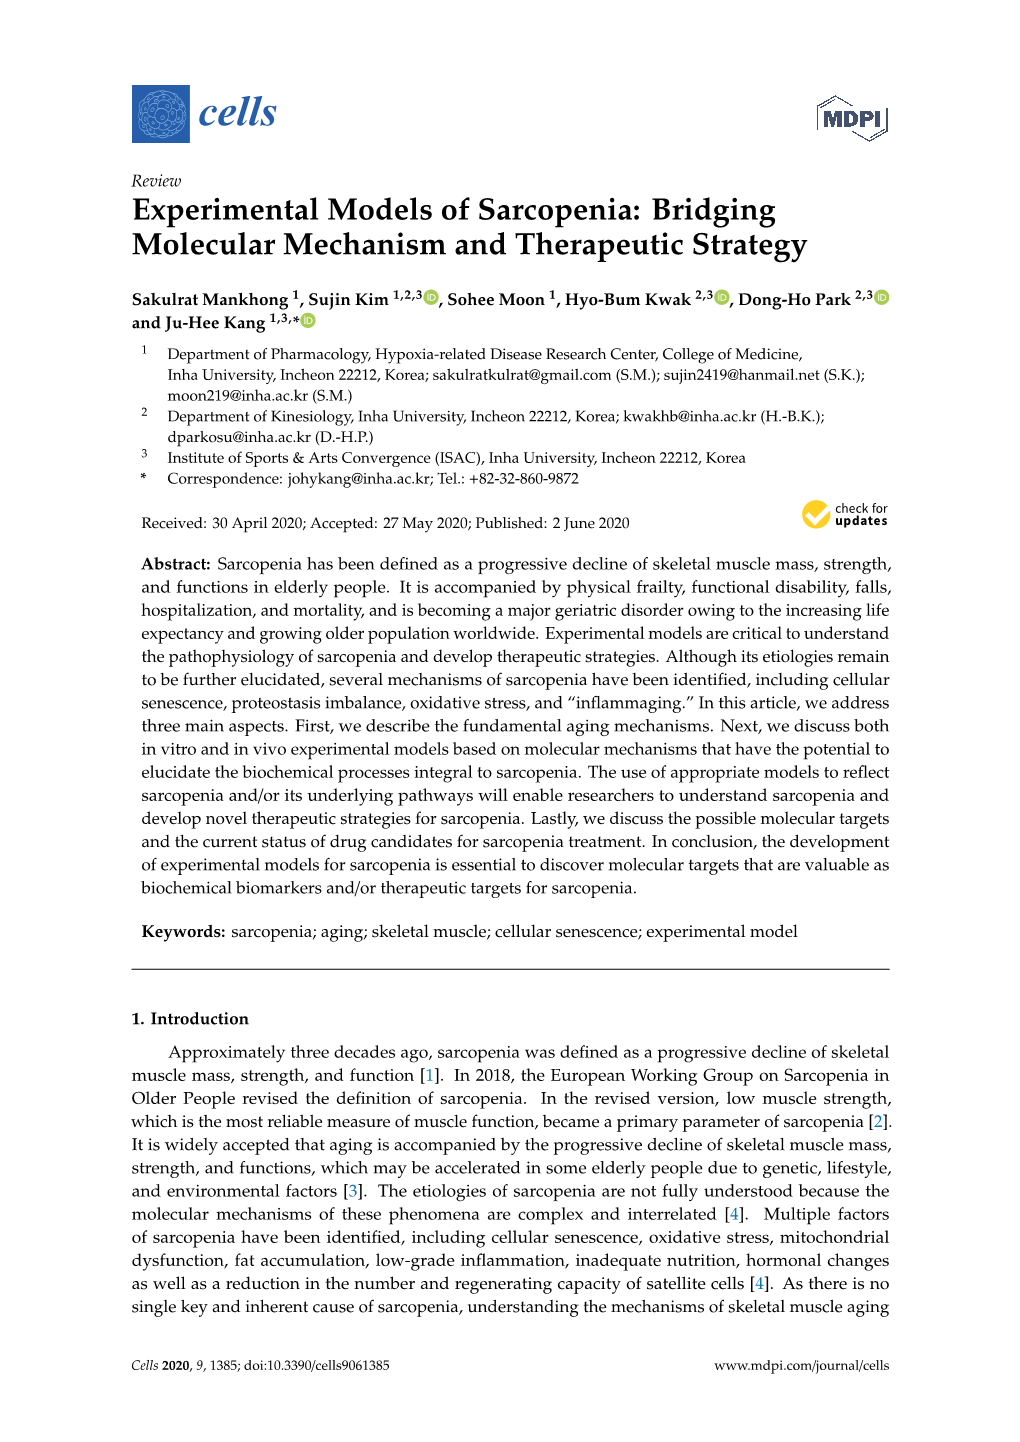 Experimental Models of Sarcopenia: Bridging Molecular Mechanism and Therapeutic Strategy